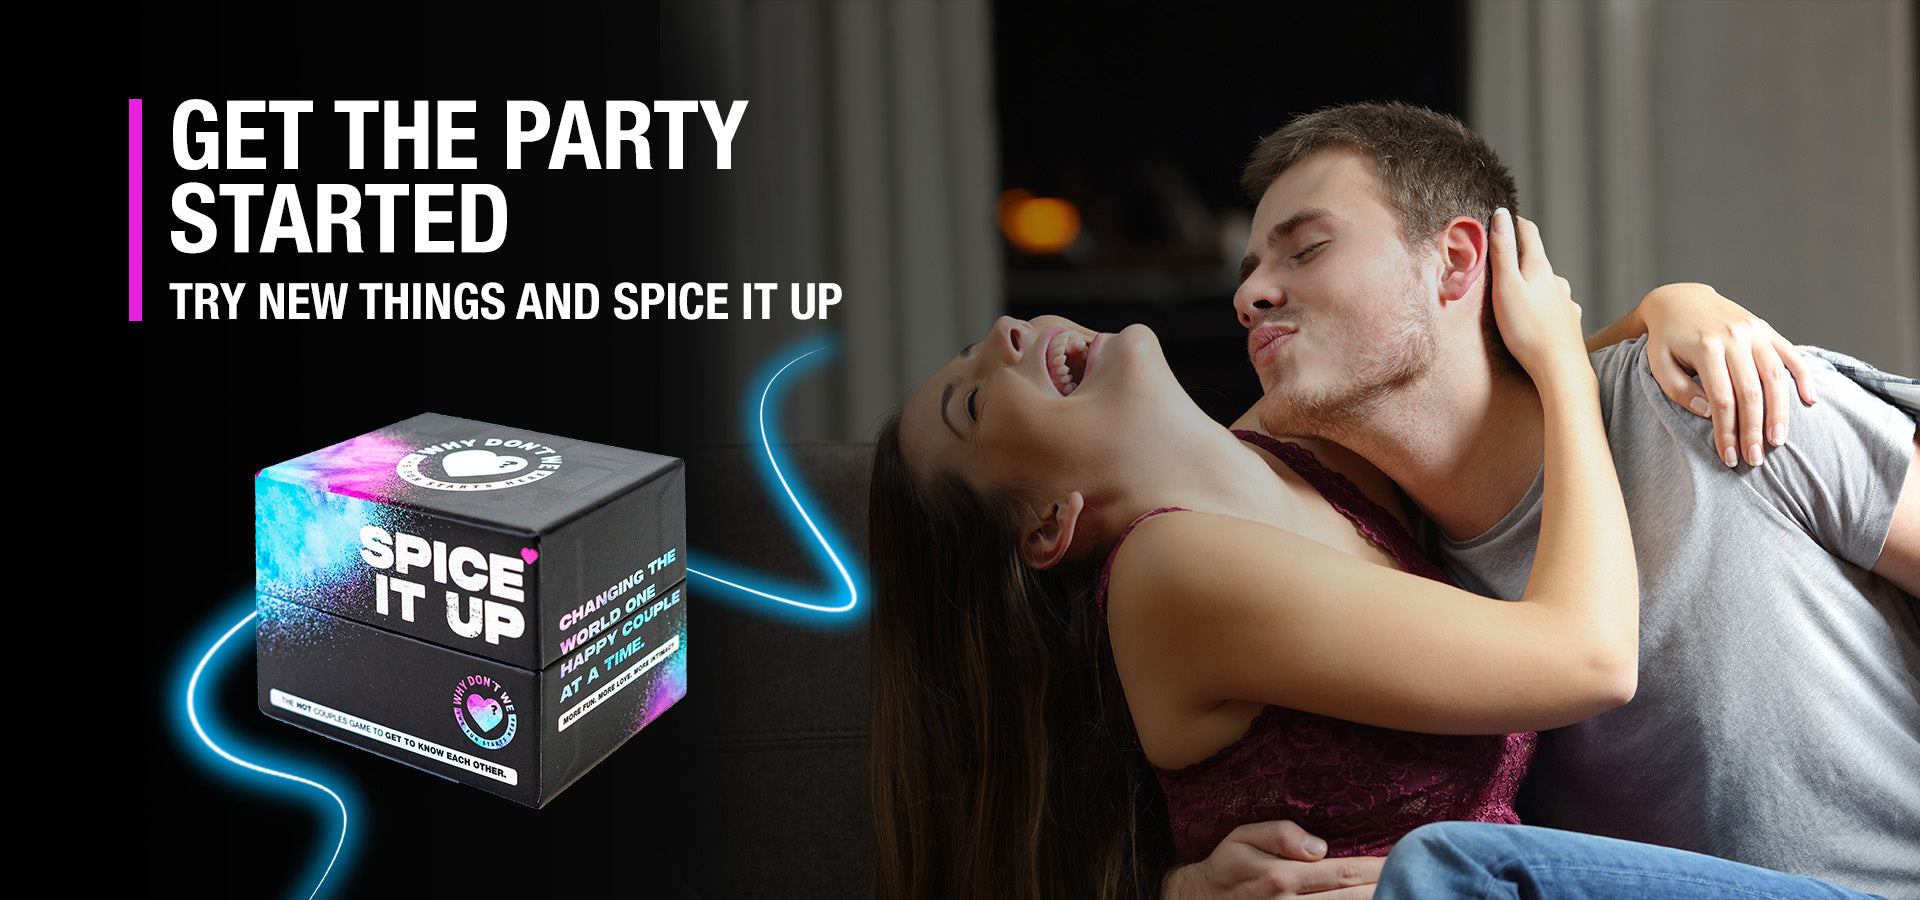 Spice it up - Couple game - Card game - Shop - romantic - Gift - Games - Couples - Relationship -Bedroom games